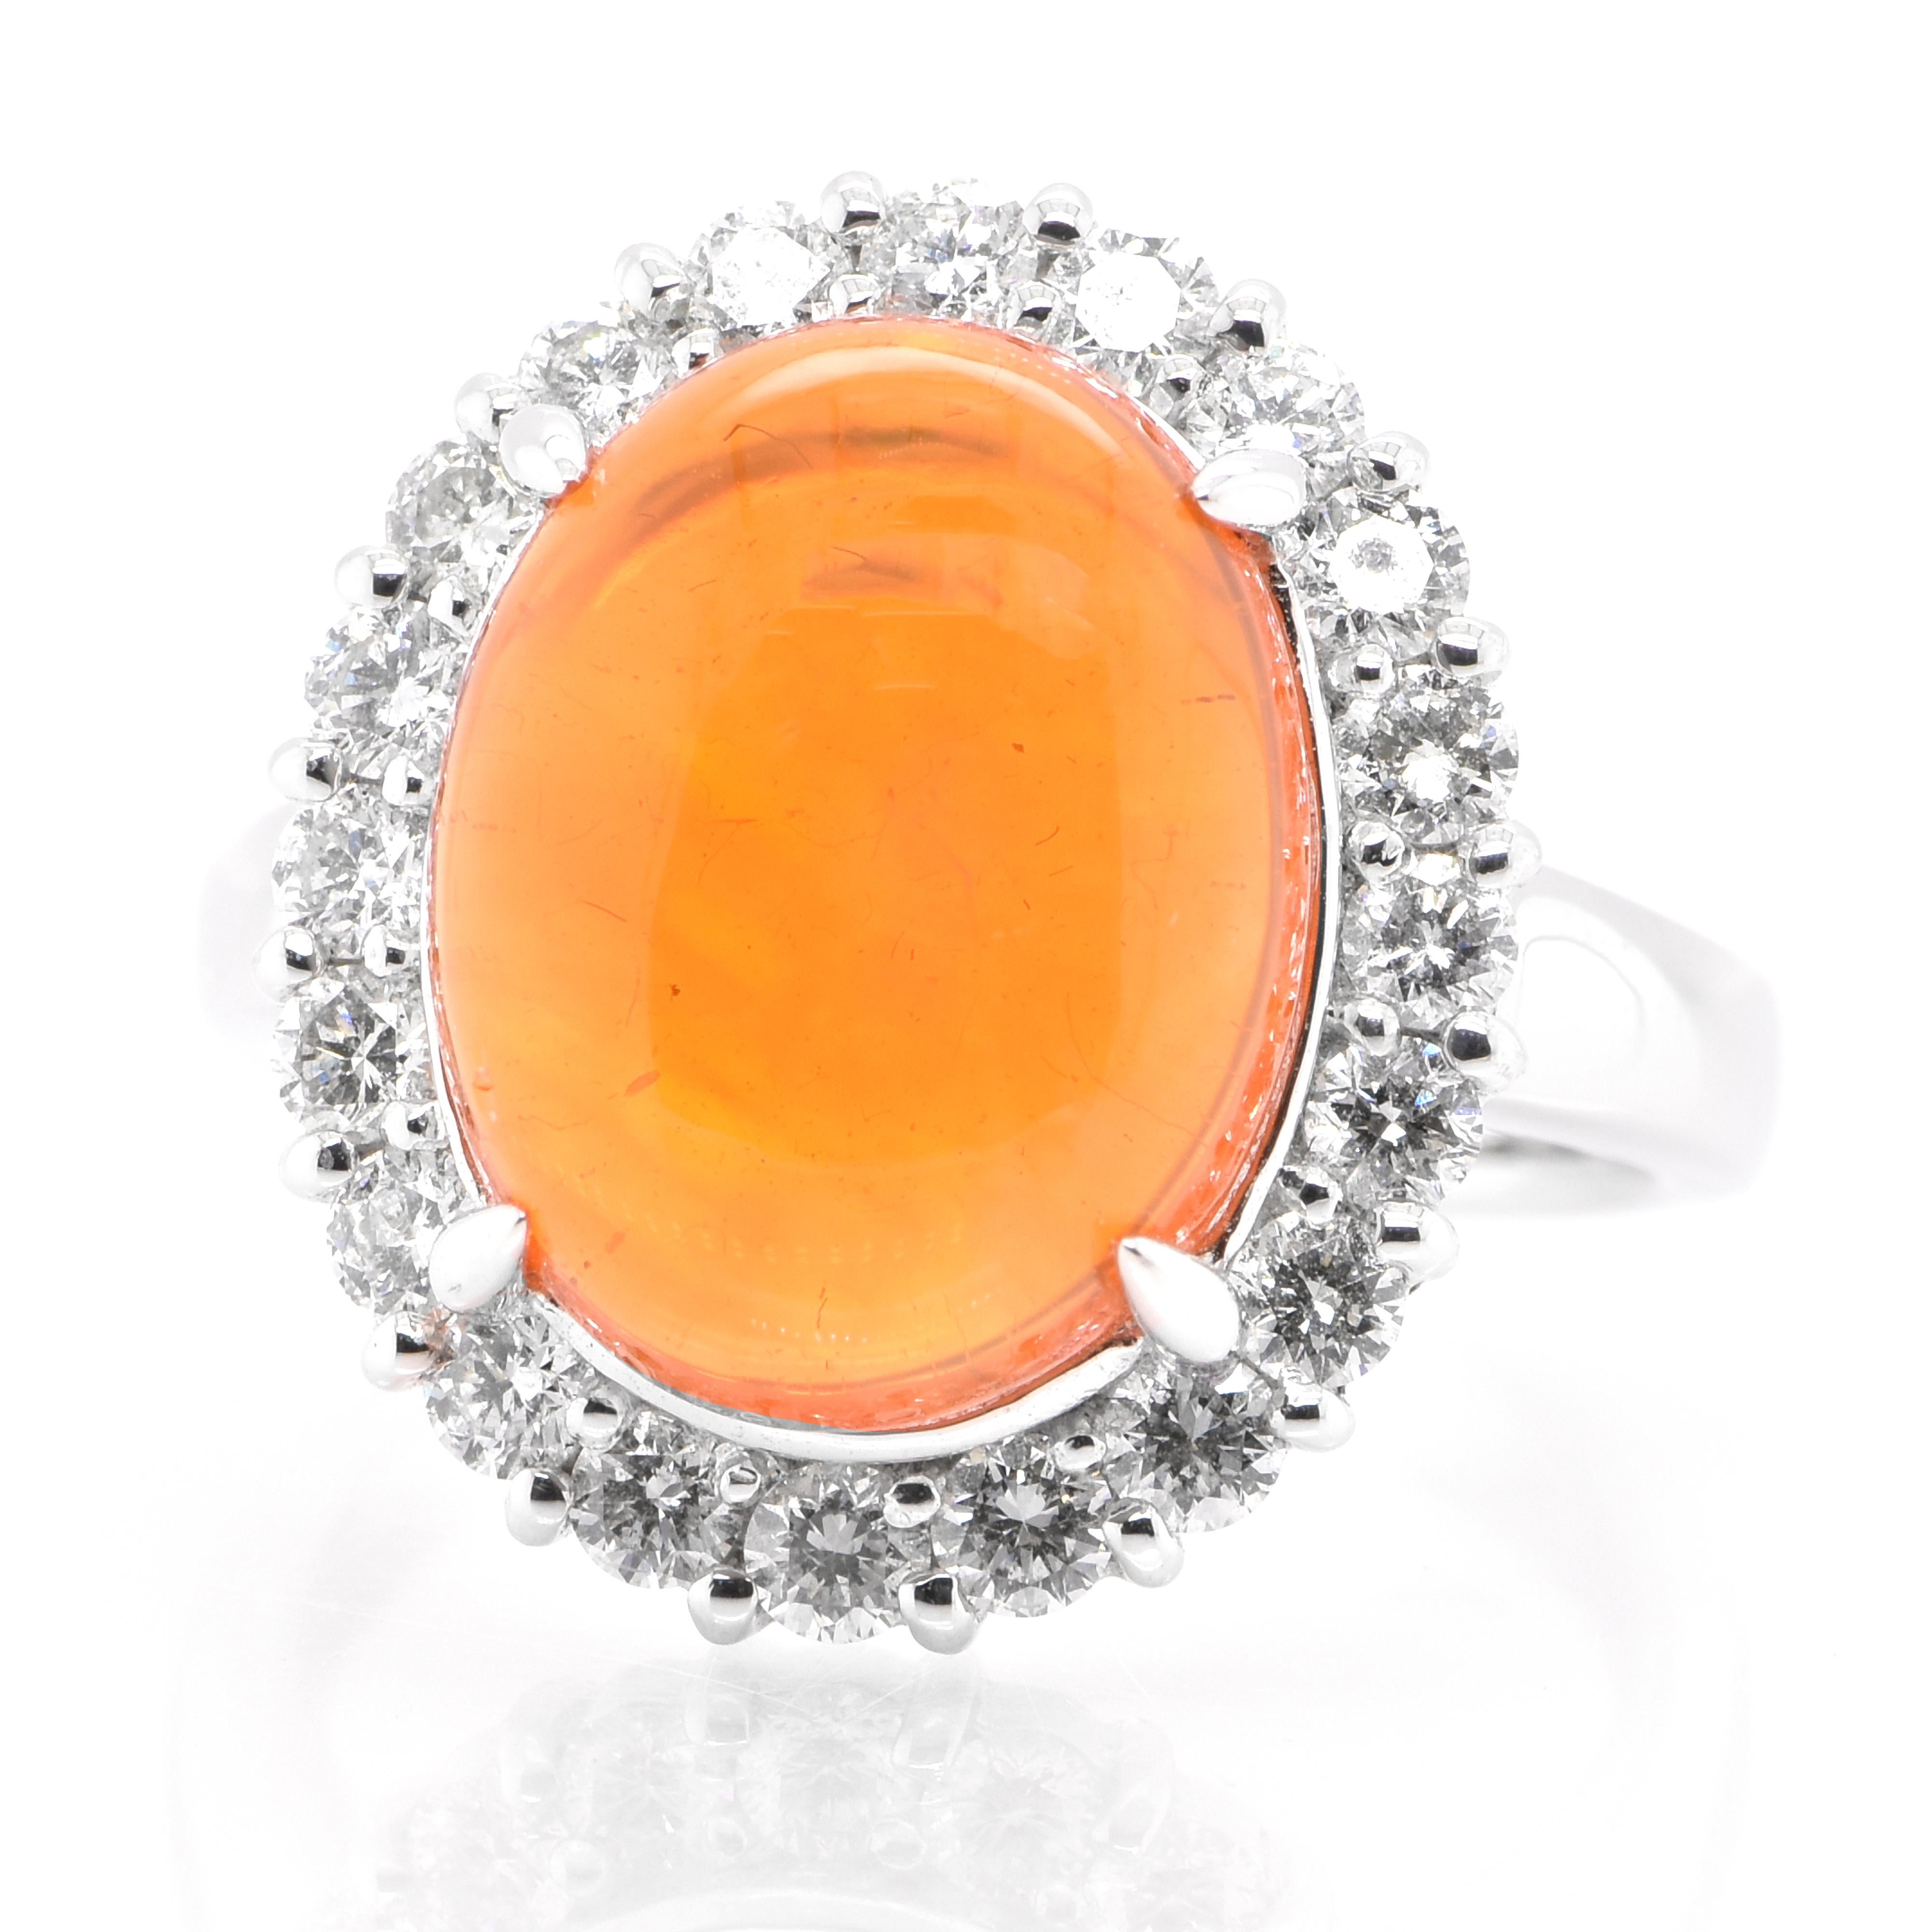 A beautiful ring featuring a 6.23 Carat Natural Mexican Fire Opal and 1.00 Carats of Diamond Accents set in Platinum. Opals are known for exhibiting flashes of rainbow colors known as 